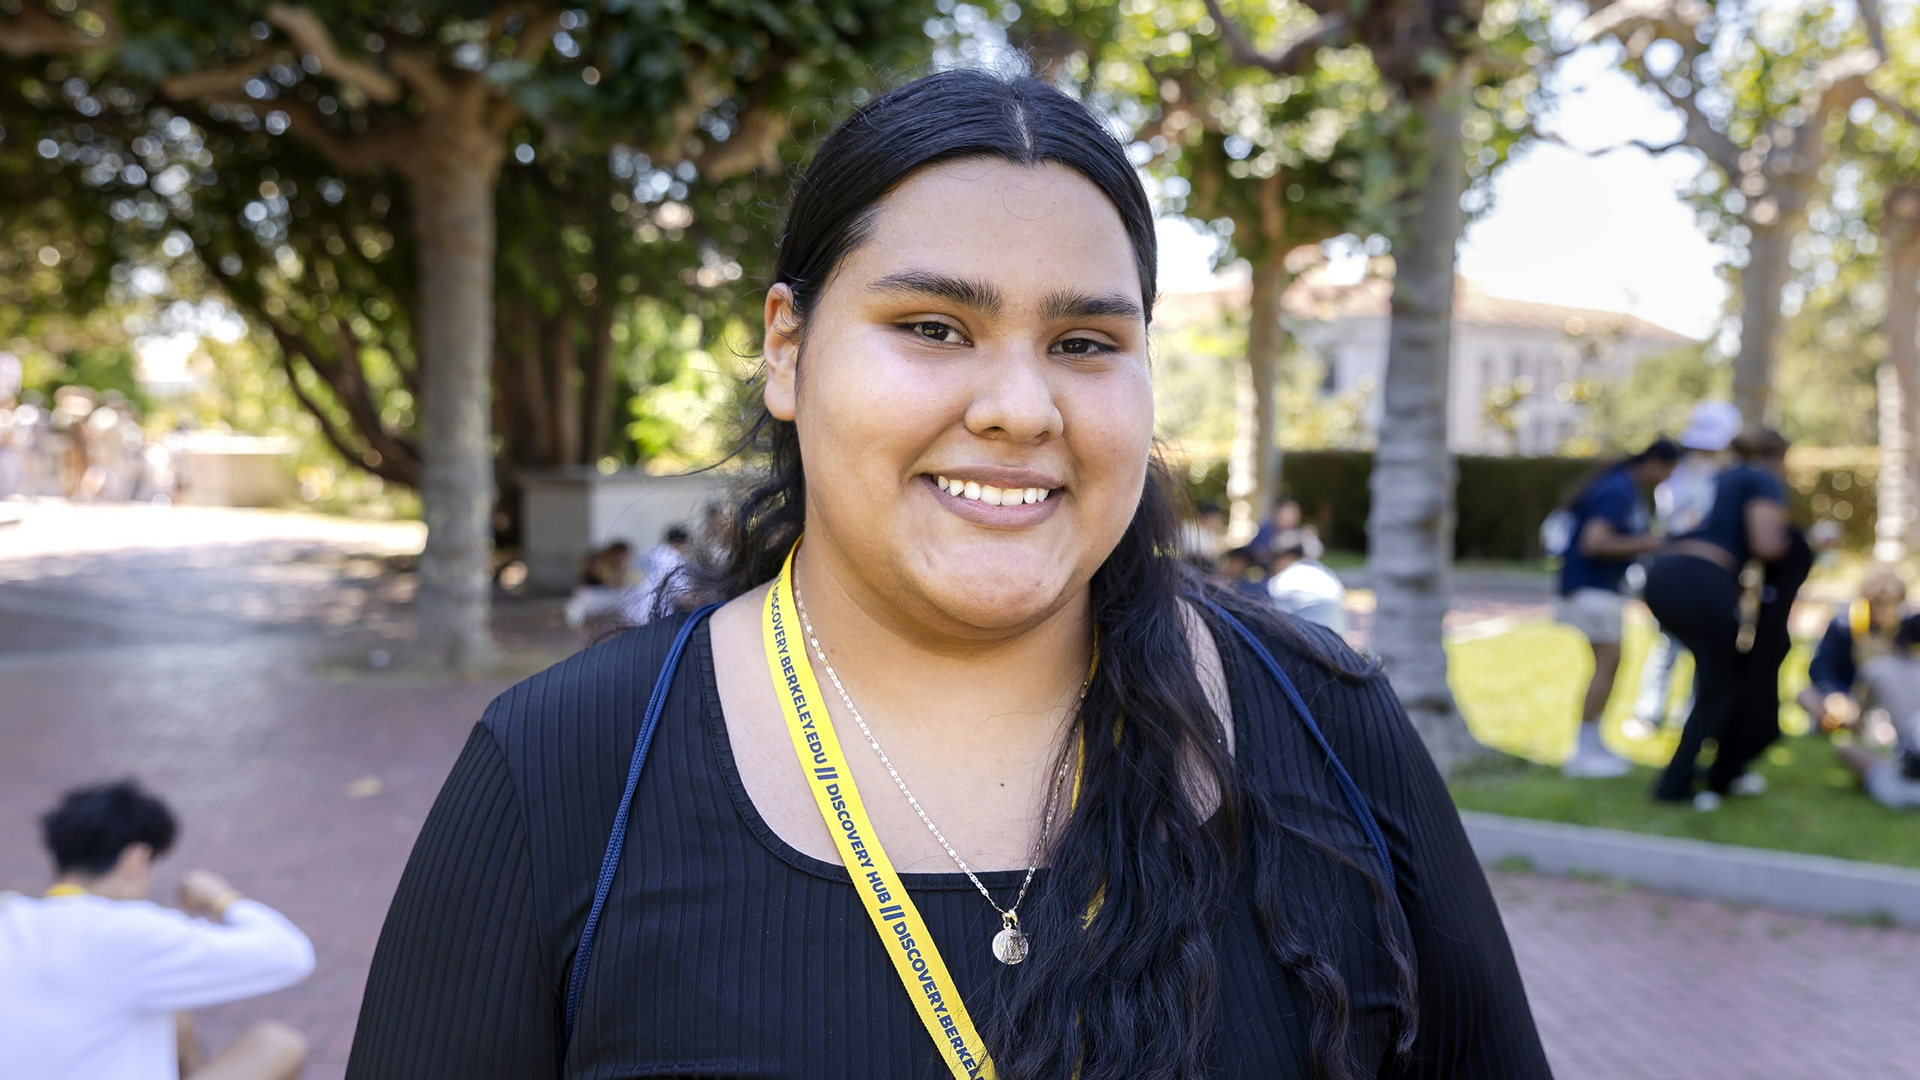 portrait of a Berkeley student smiling and standing outside with trees and other students in the background